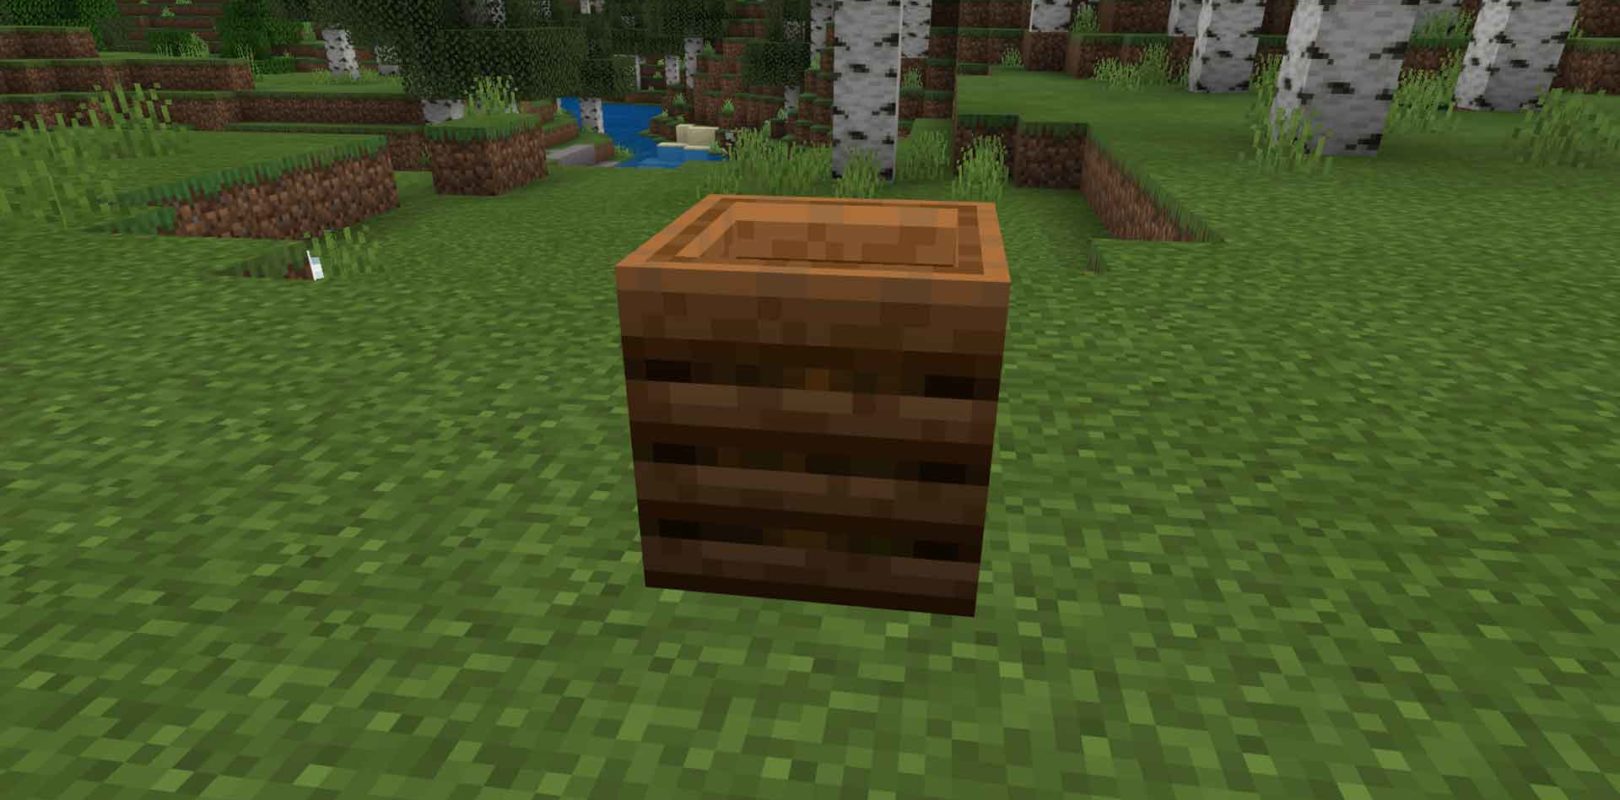 What is the title of this picture ? How To Make A Composter Minecraft Java